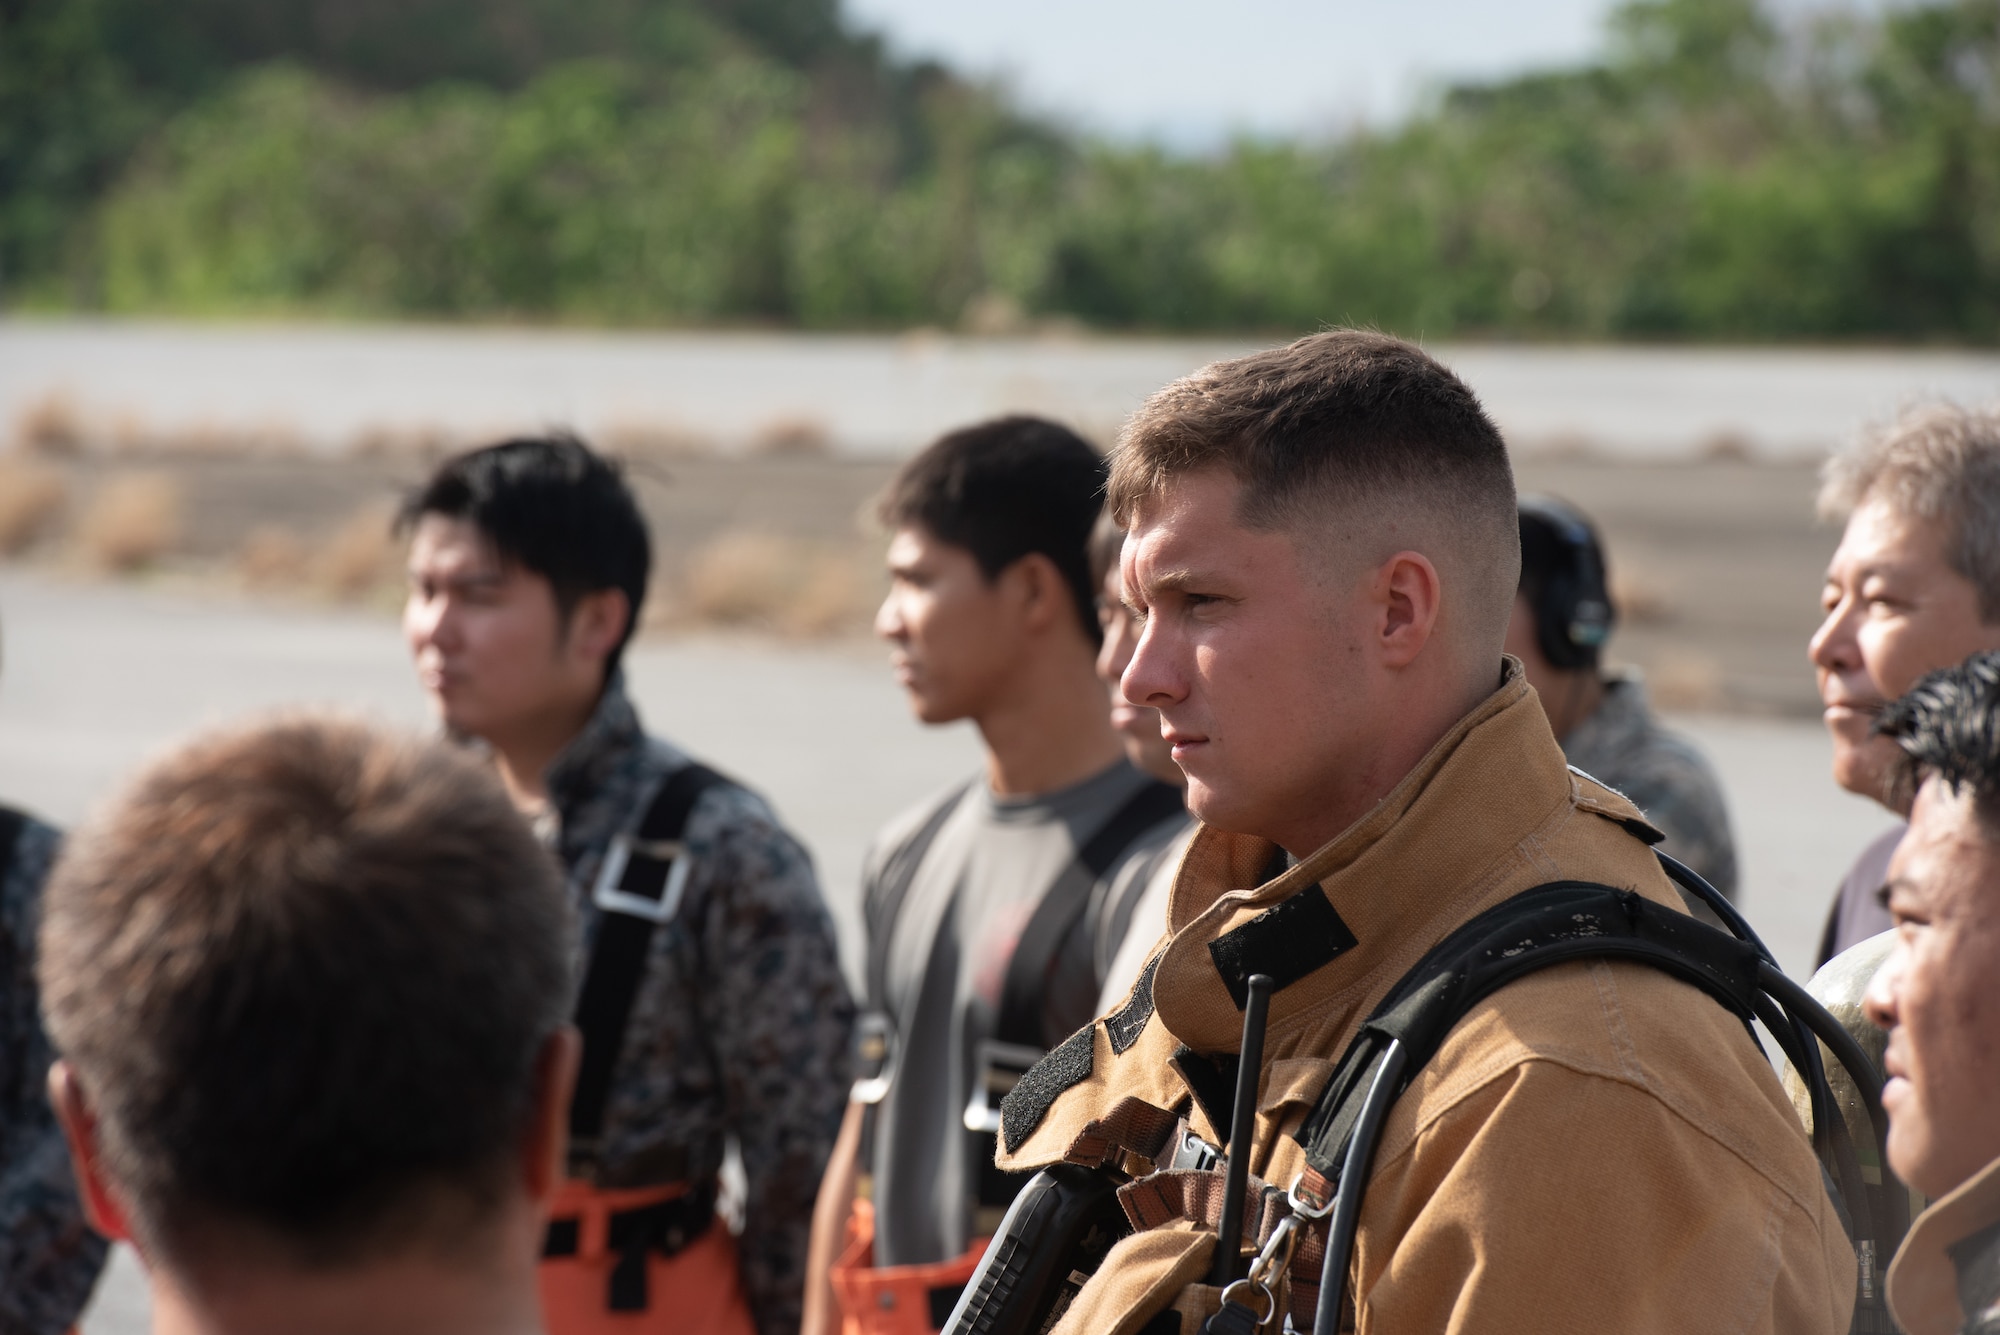 U.S. Air Force firefighters from the 18th Civil Engineer Squadron and Japan Air Self Defense Force firefighters from the 9th Wing, Naha Air Base, Japan, listen to a briefing Nov. 15, 2018, at Kadena Air Base, Japan. Firefighters conduct training regularly to maintain constant readiness for emergencies. (U.S. Air Force photo by Staff Sgt. Micaiah Anthony)